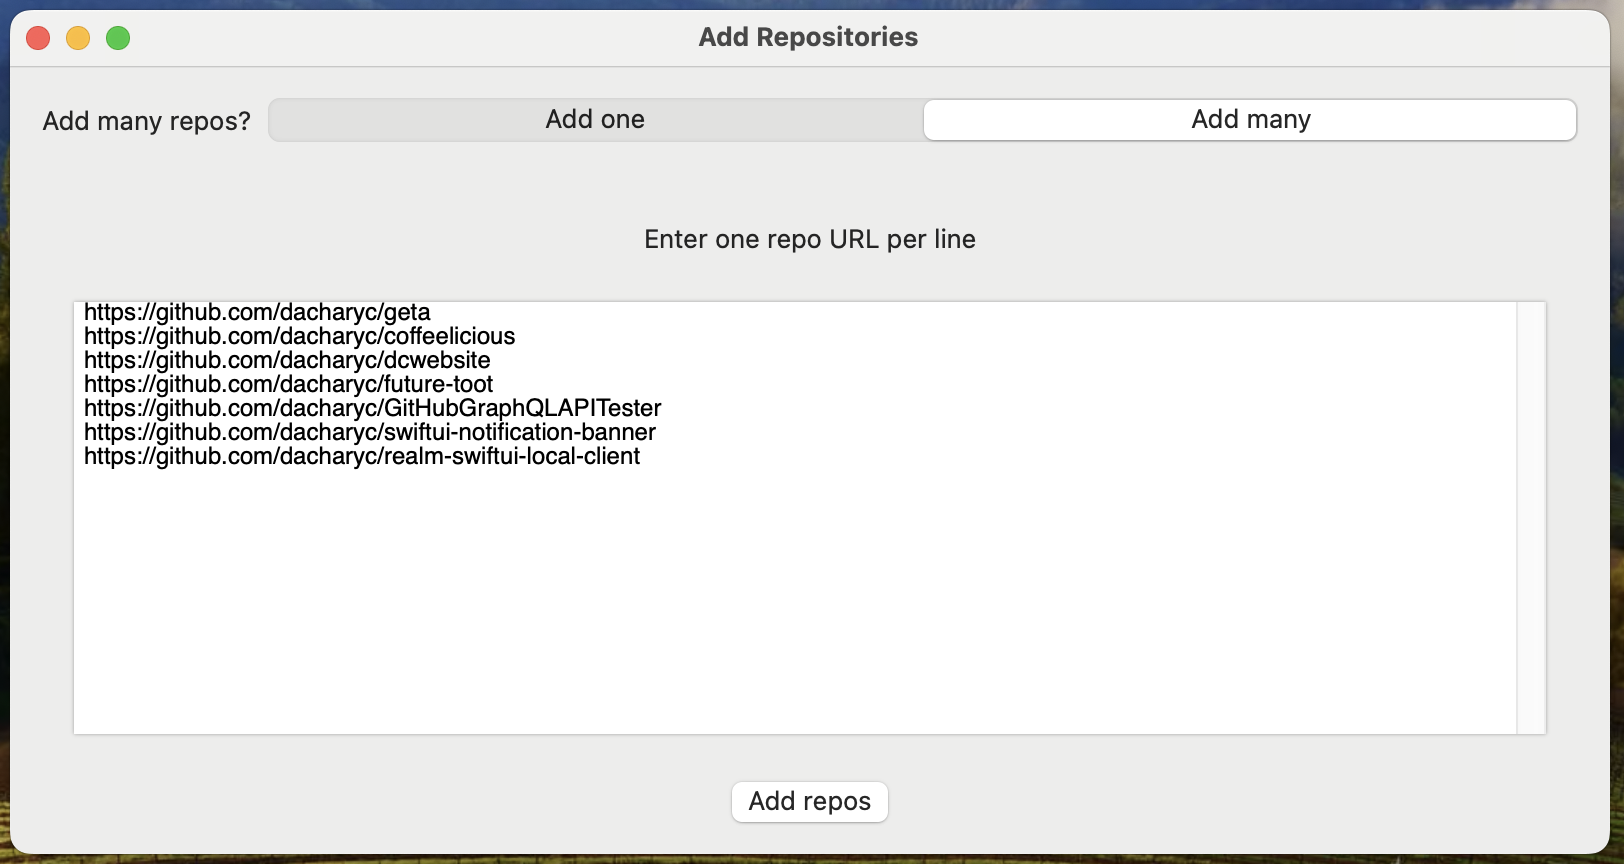 Screenshot showing the Add Repo sheet, with Add Many selected and a text box to enter many repository URLs